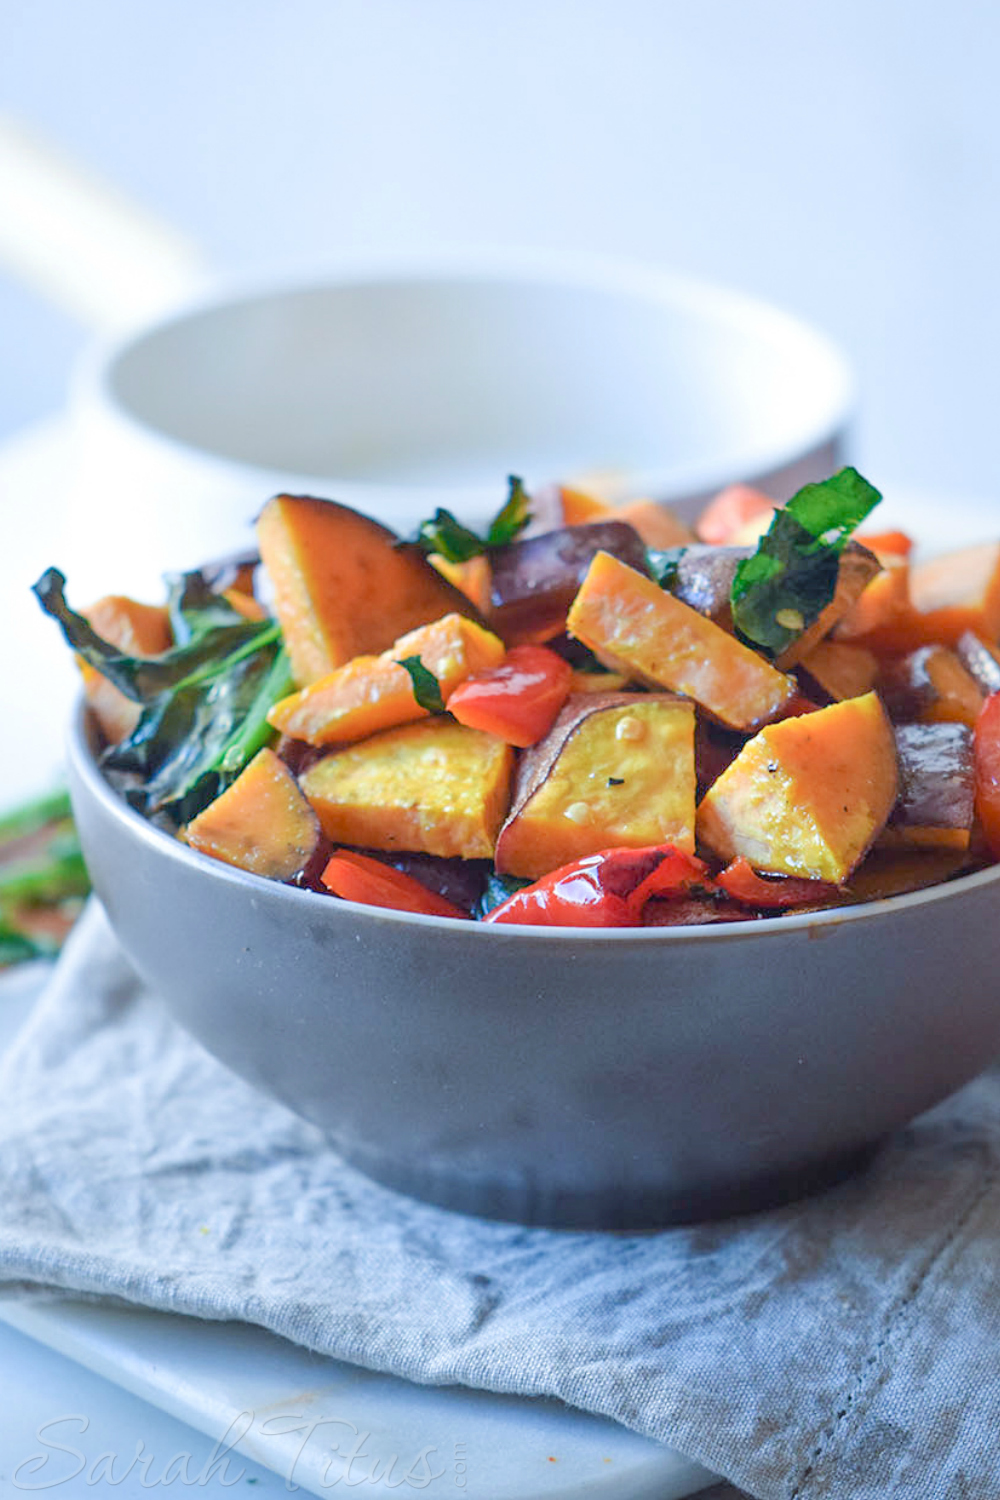 Bowl full of Colorful Sweet Potato Bake made with sweet potatoes, red peppers and spinach